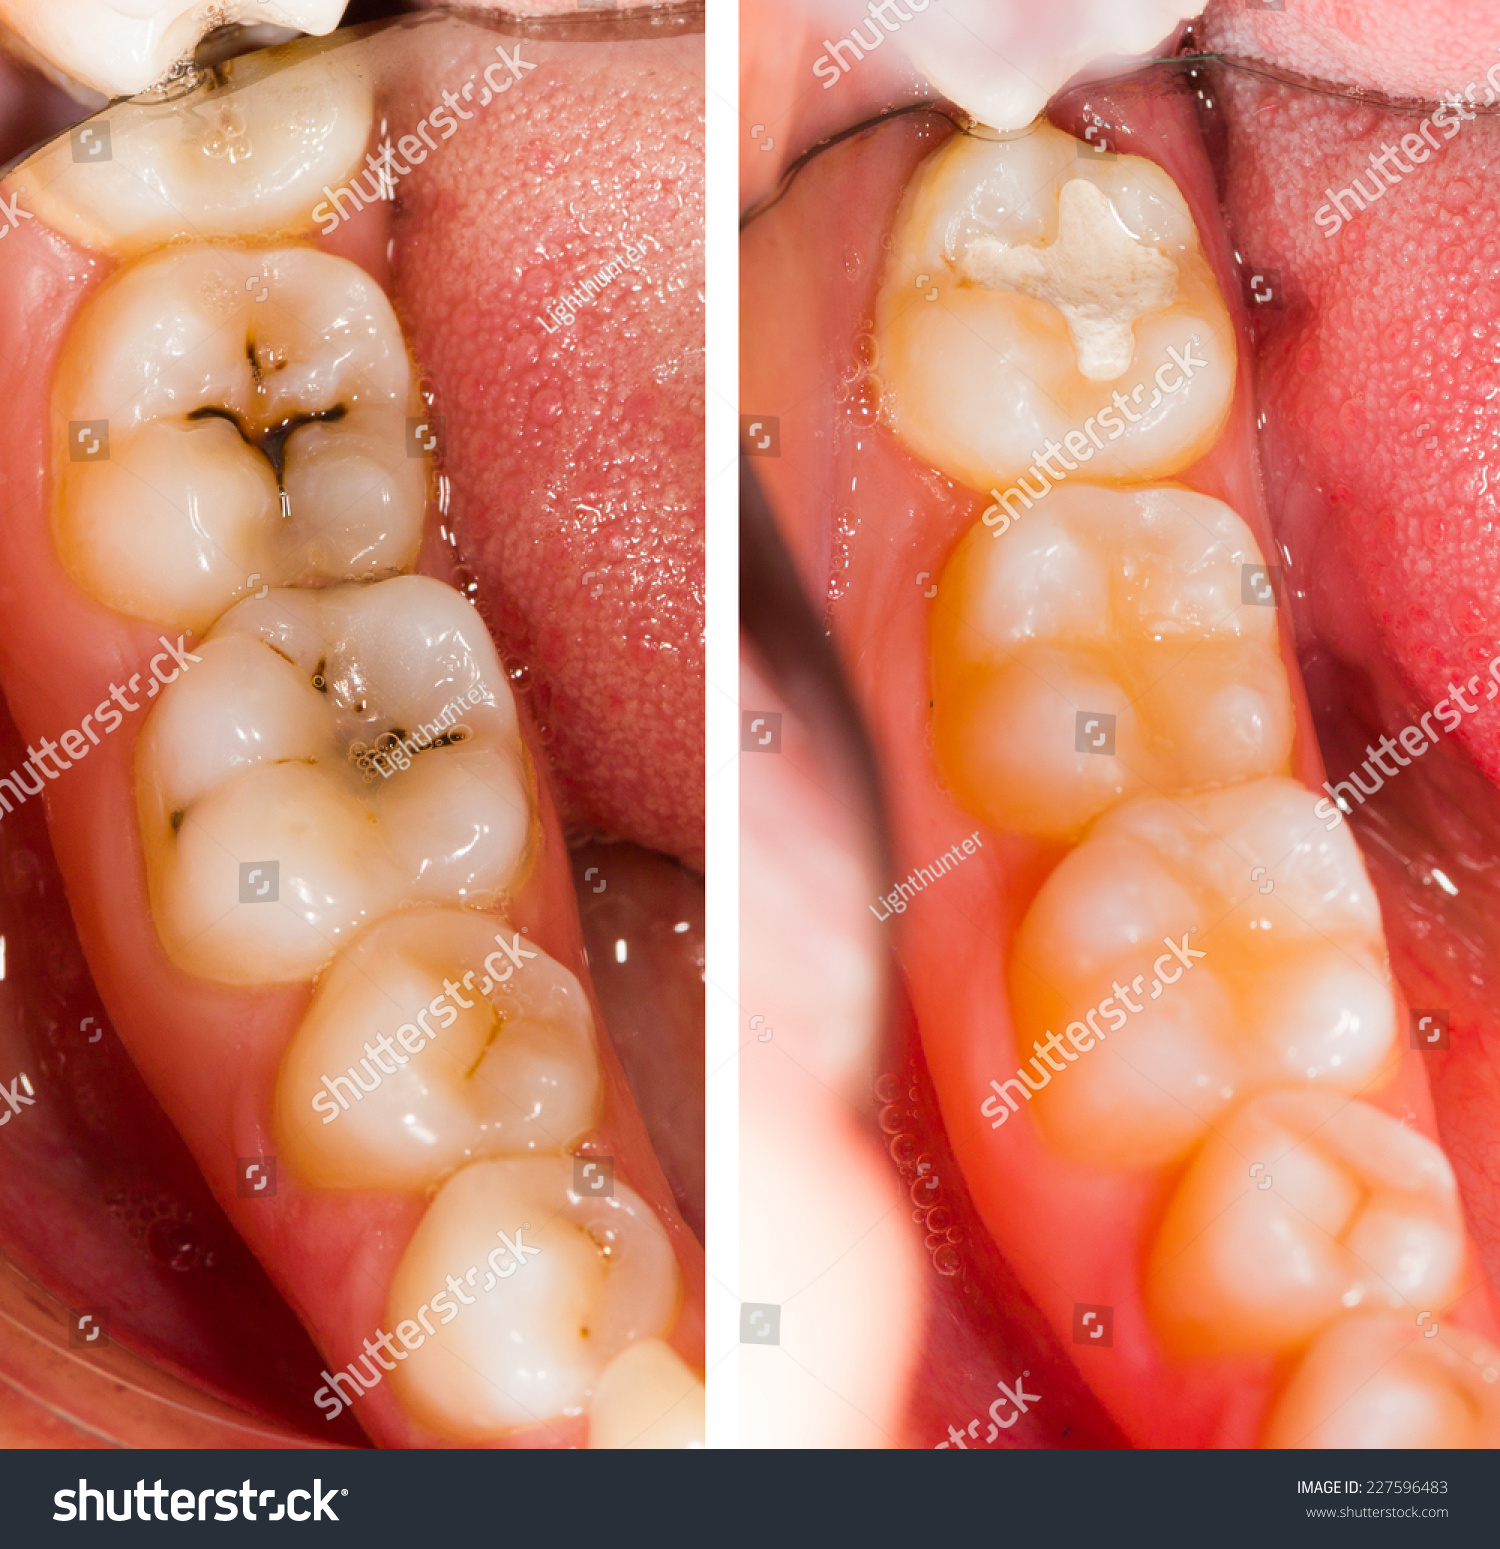 Before And After Dental Treatment - Beforeafter Series ...